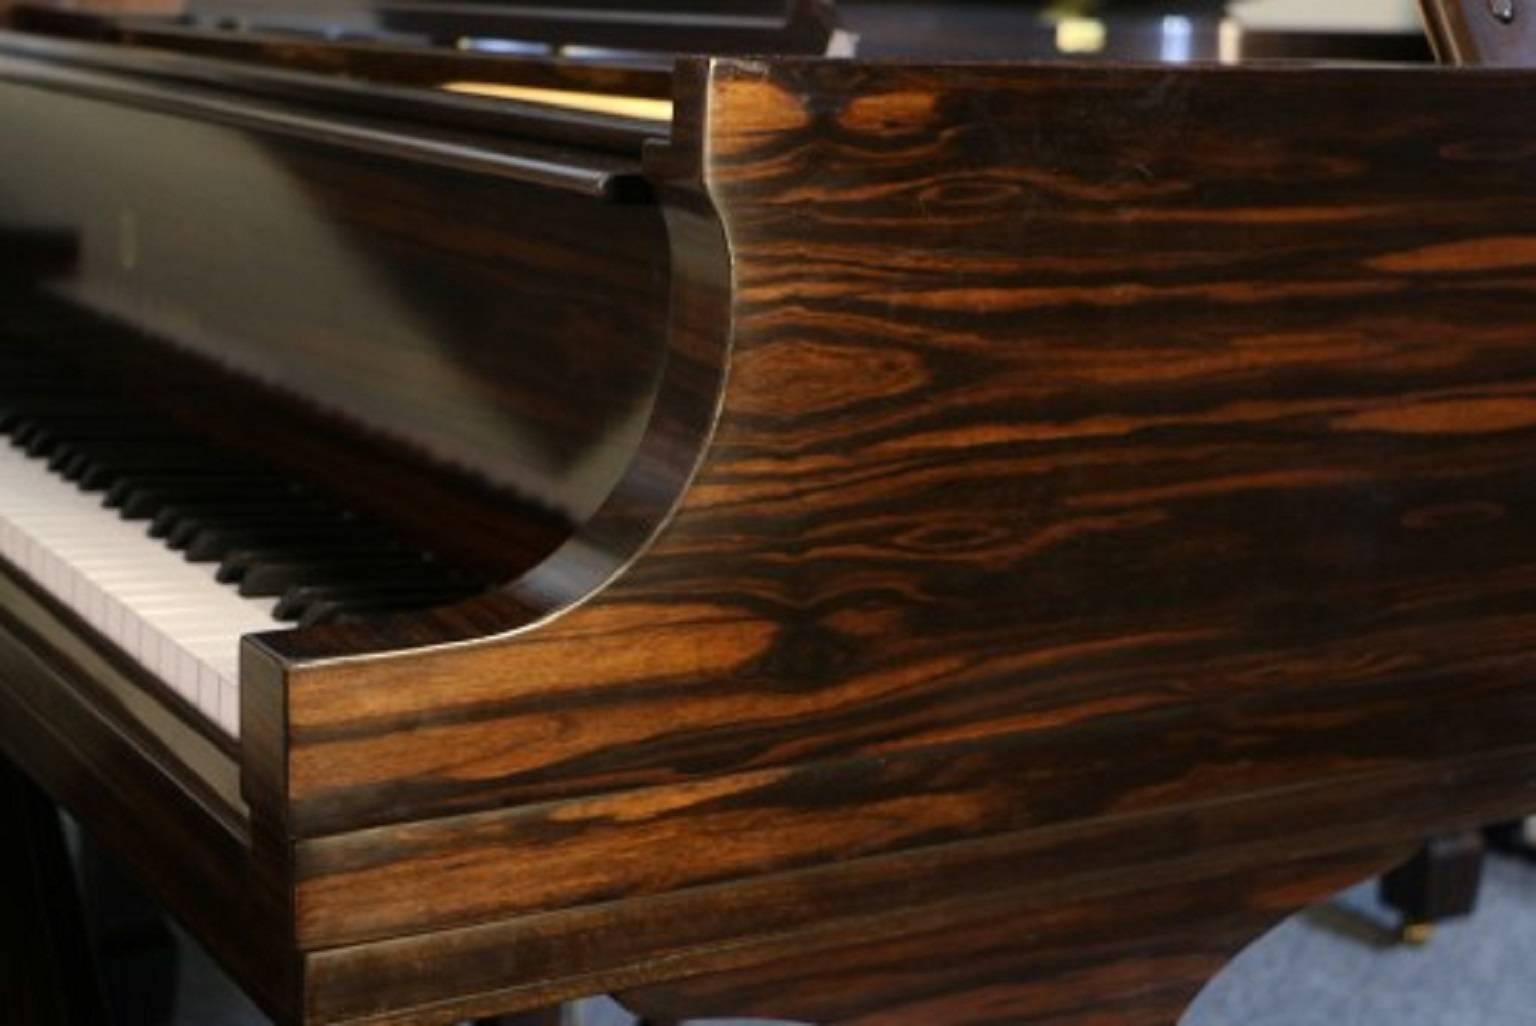 See and hear more about this magnificent piano on the VIDEO at the bottom of Sonny's Luxury Art Case Piano storefront homepage. 

Art Case Steinway Piano Crown Jewel Model L 5'10.5", very rare exotic wood "Macassar Ebony". They don't